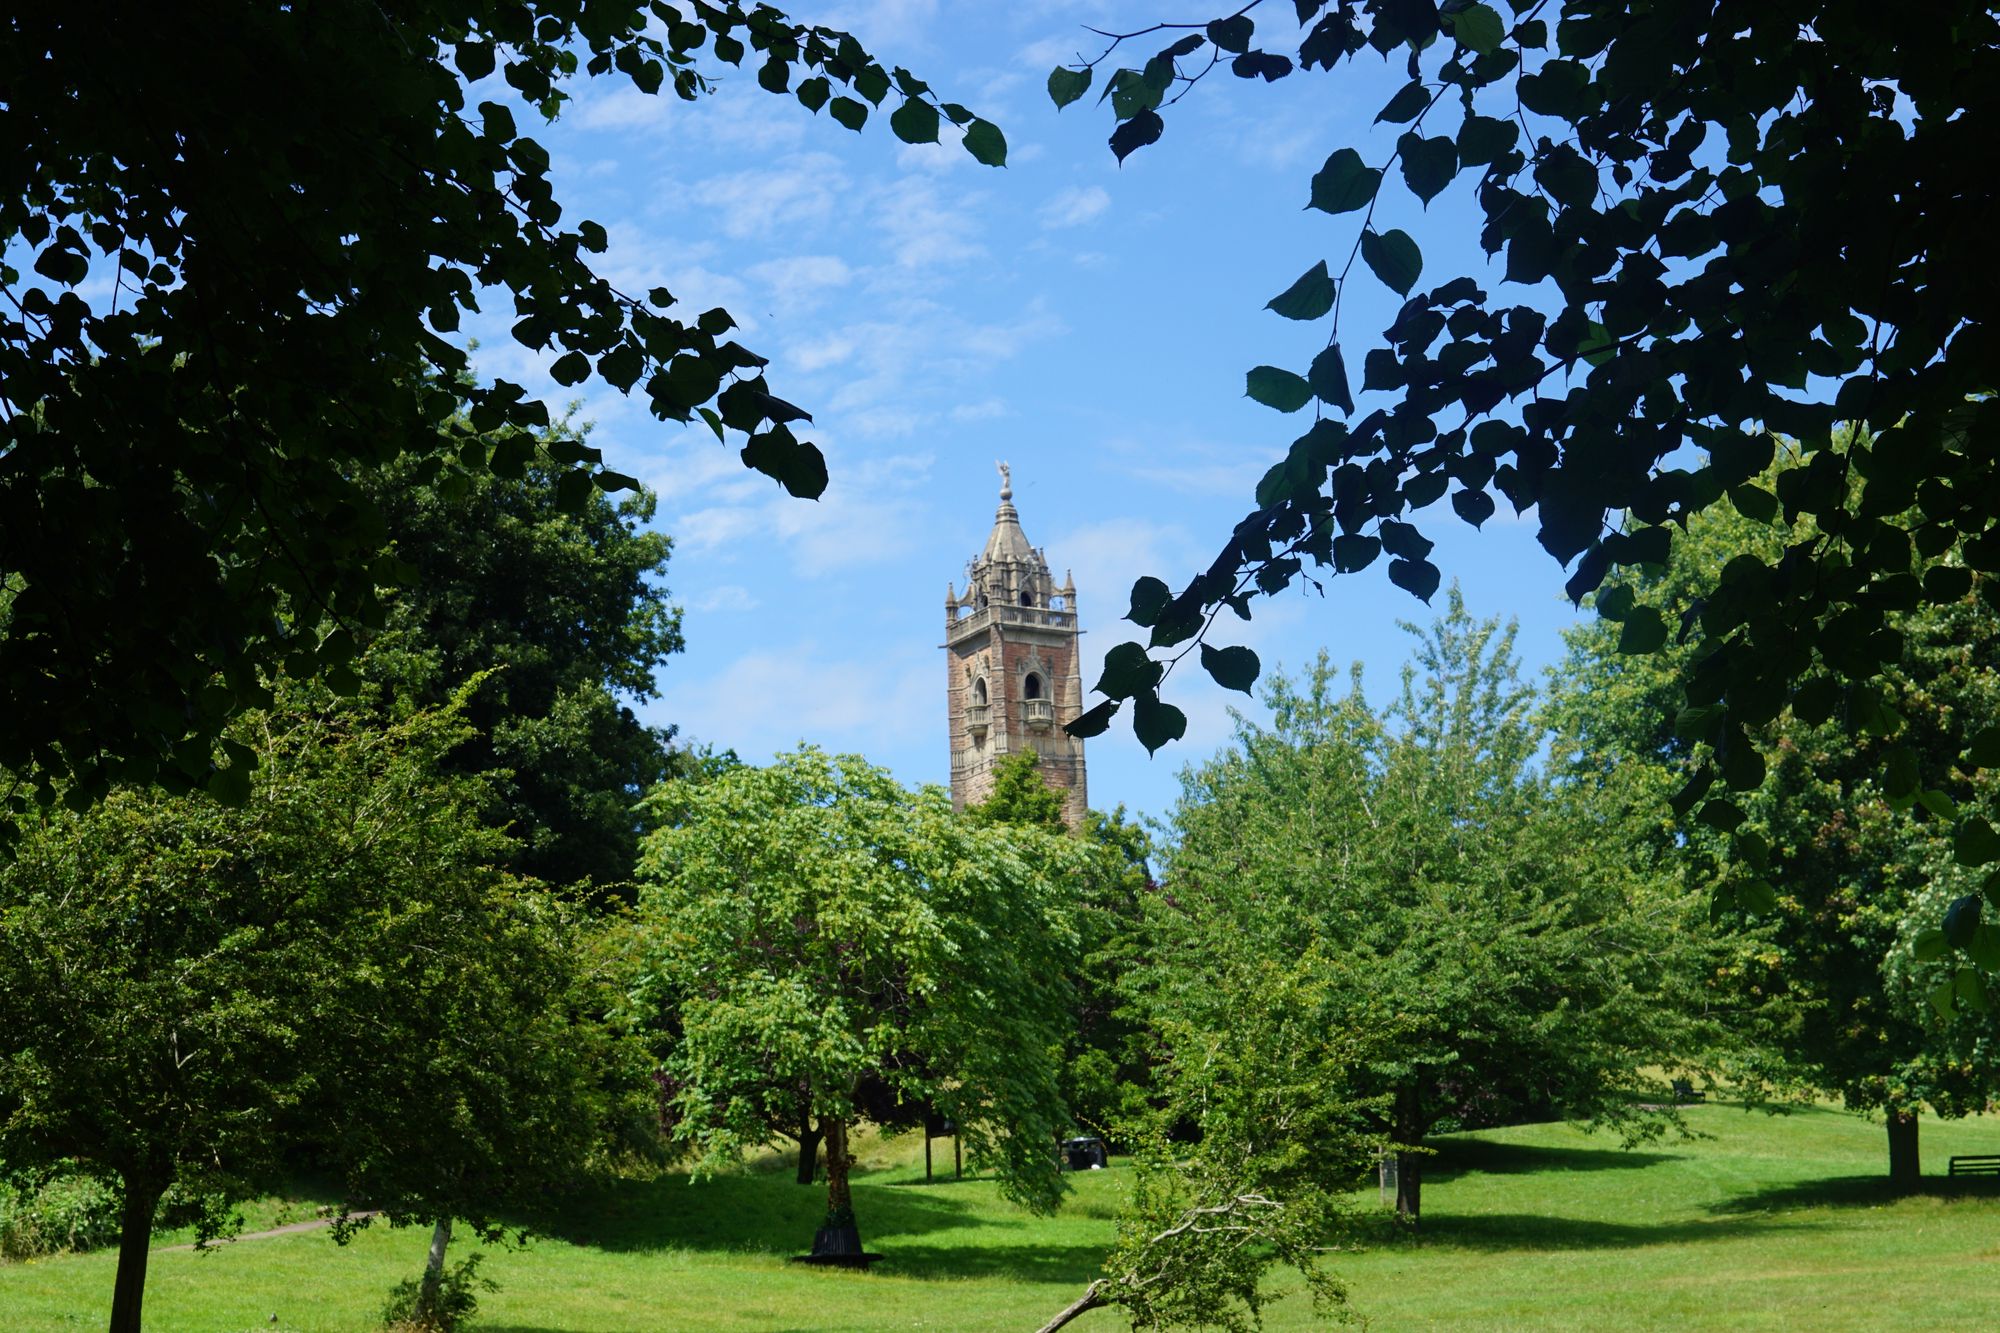 A tower on a hill surrounded by nearby foliage.